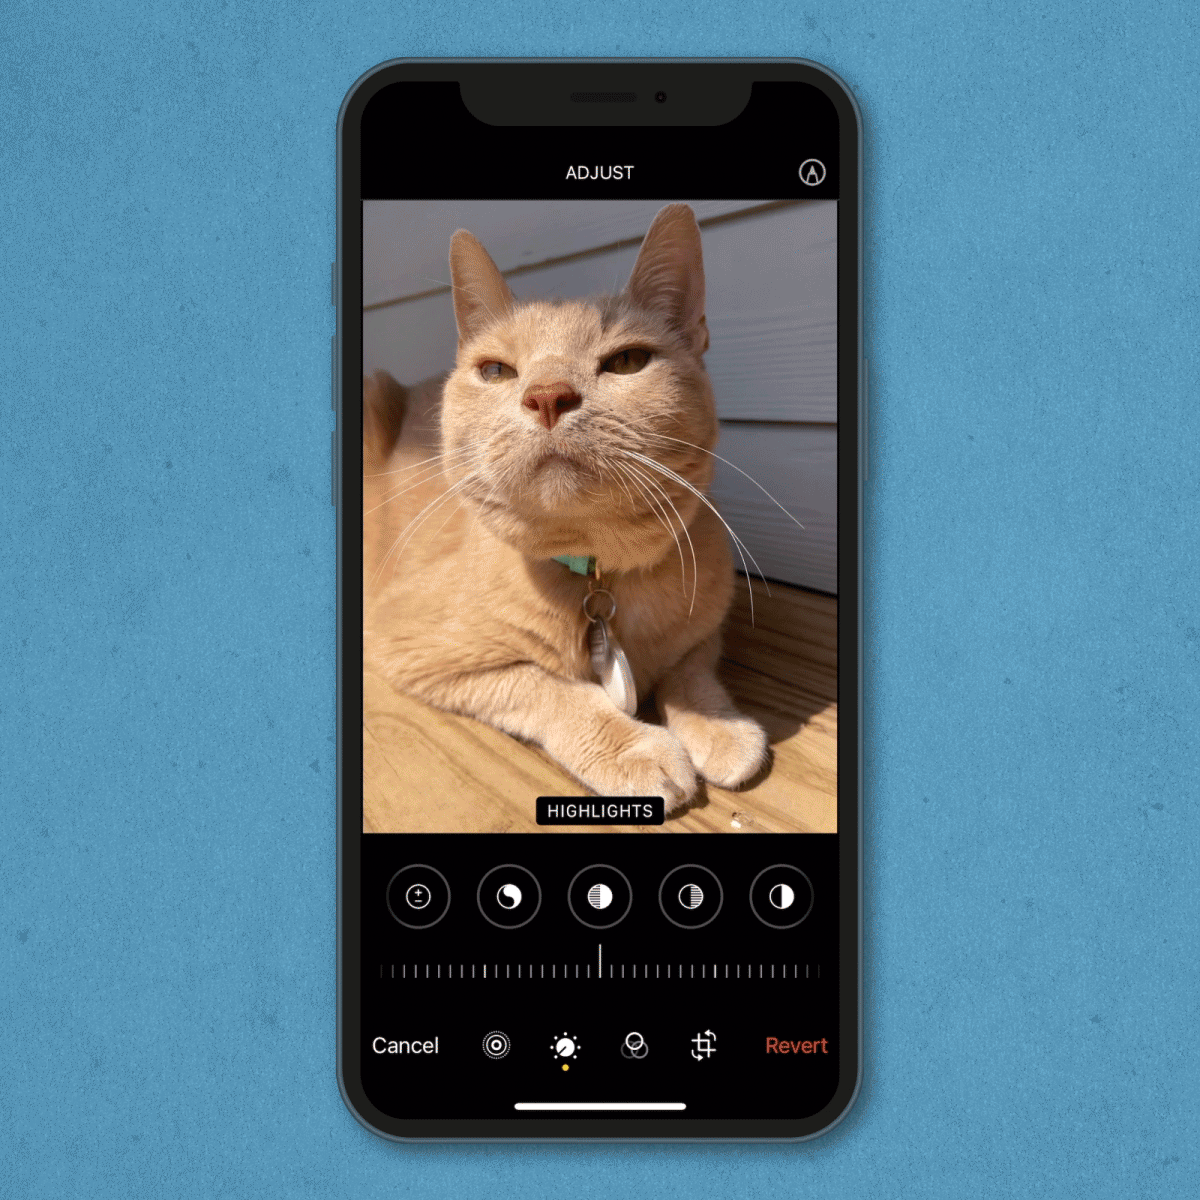 gif showing how to edit a photo's highlights on an iPhone